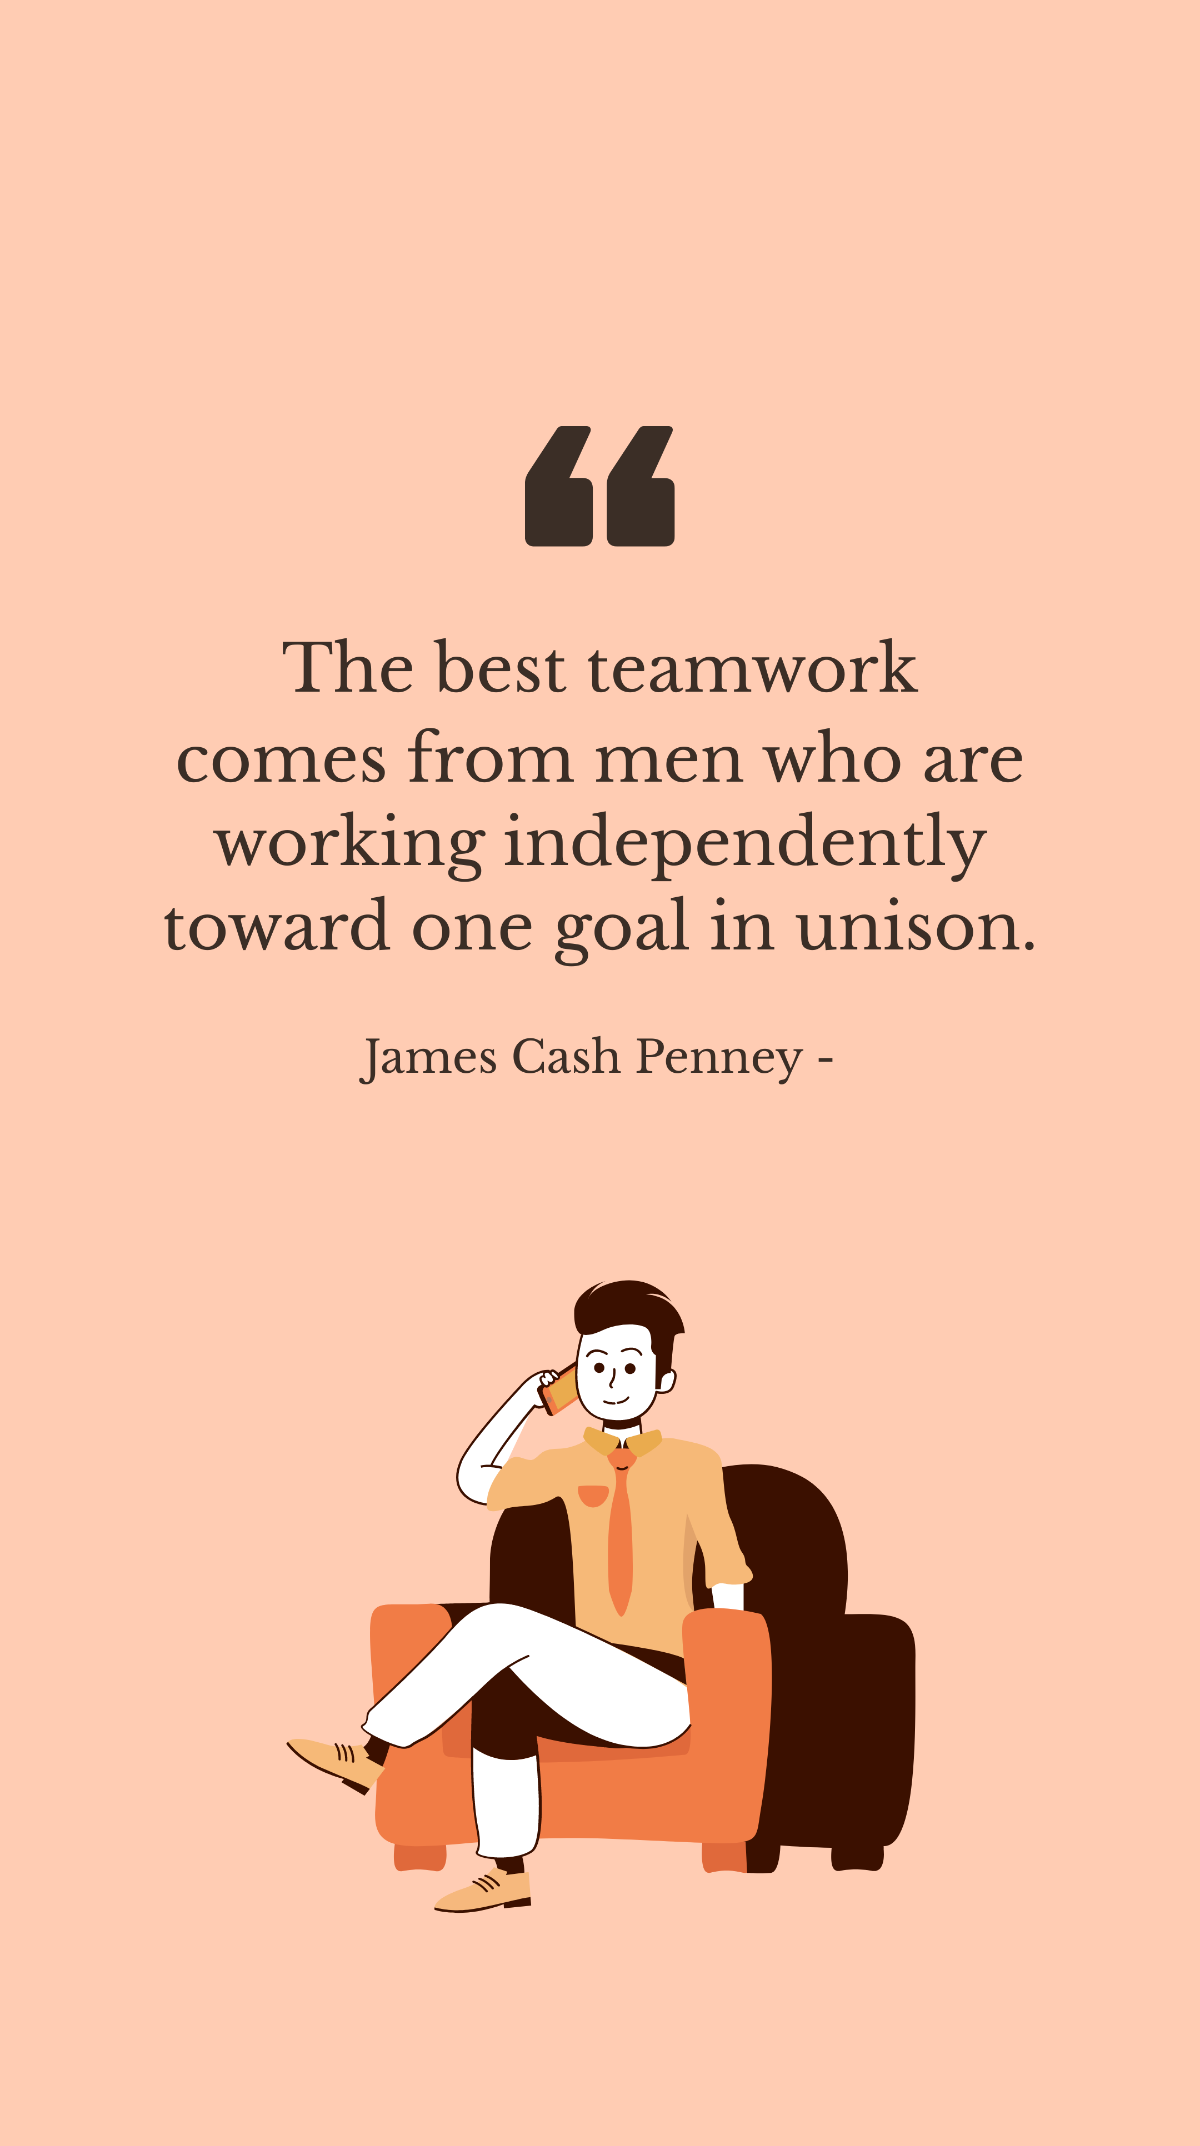 James Cash Penney - The best teamwork comes from men who are working independently toward one goal in unison.